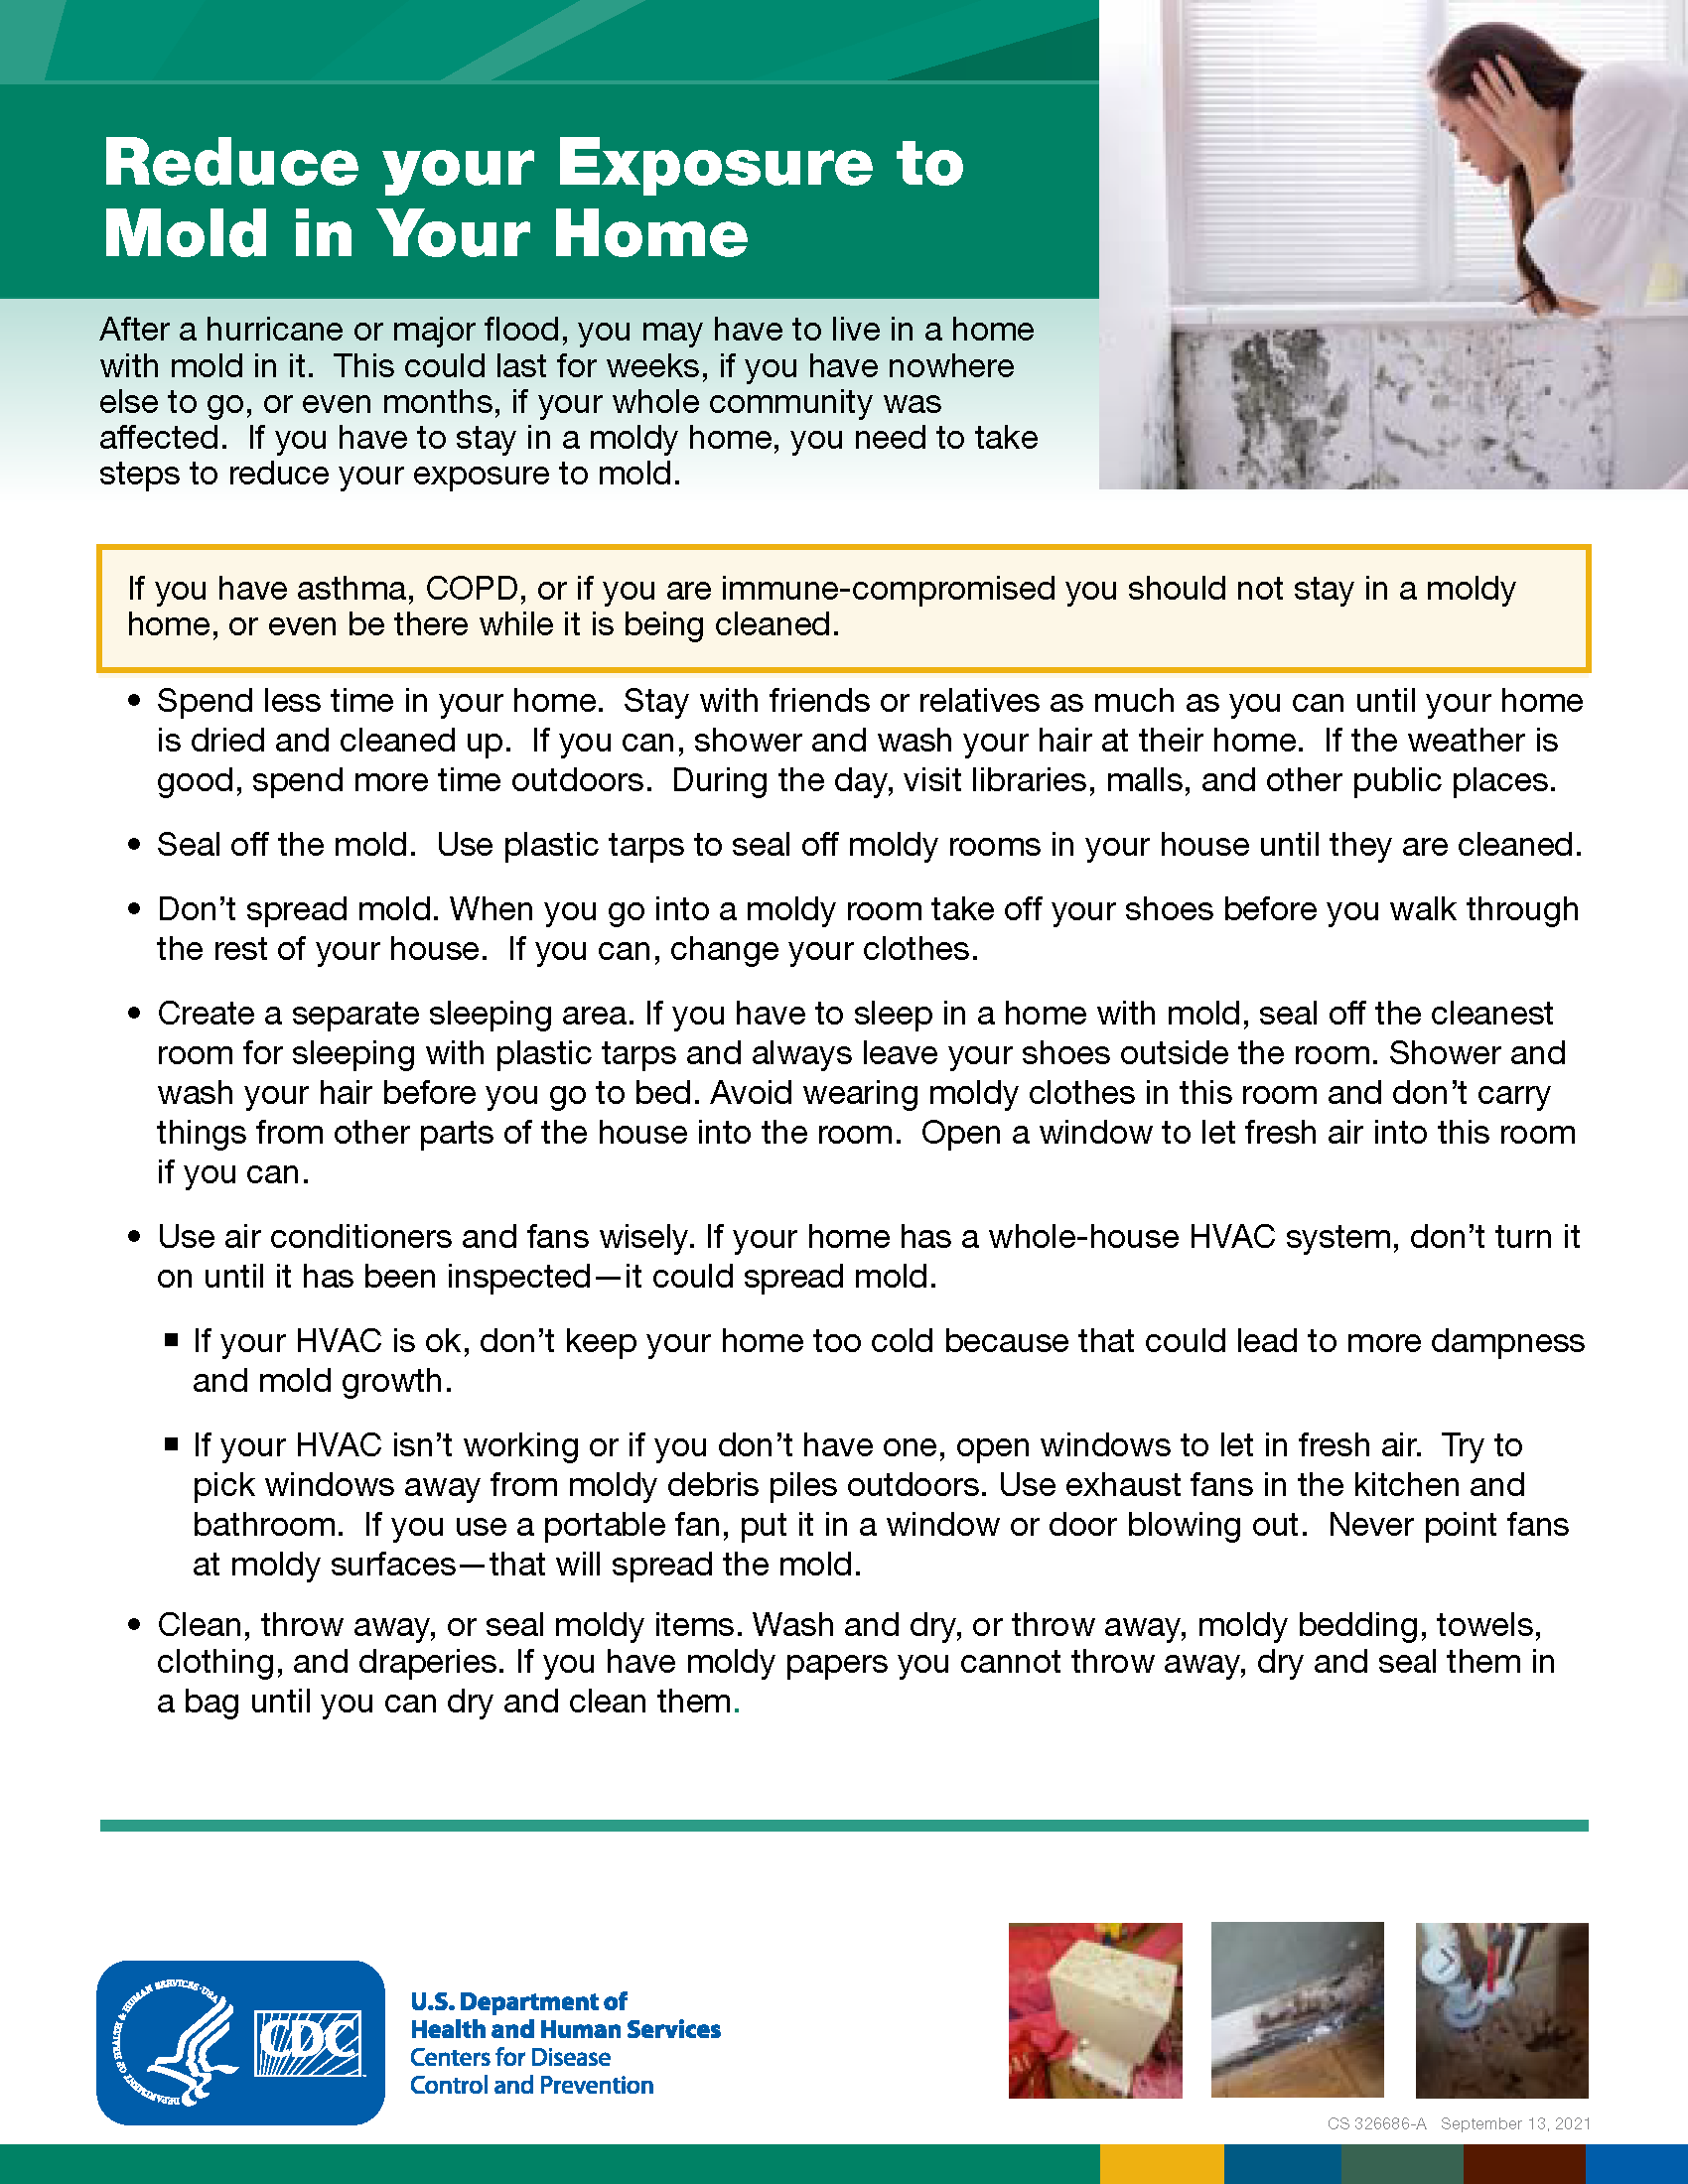 Reducing your exposure to mold